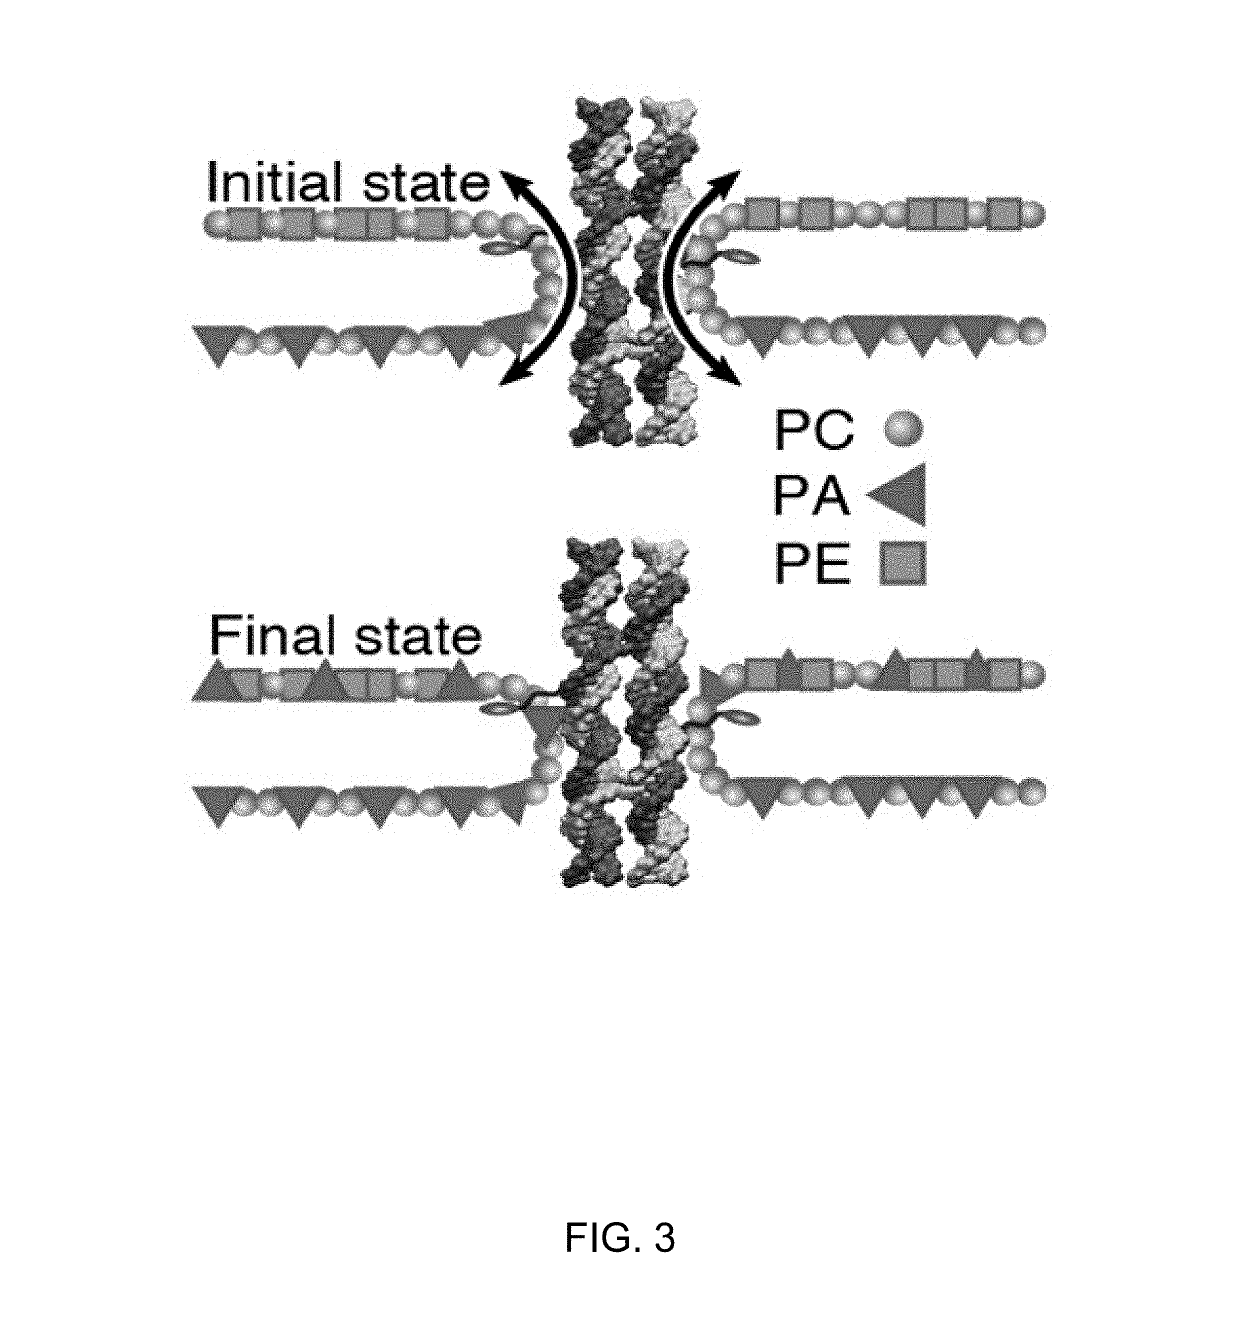 Nucleic Acid and Other Compositions and Methods for the Modulation of Cell Membranes